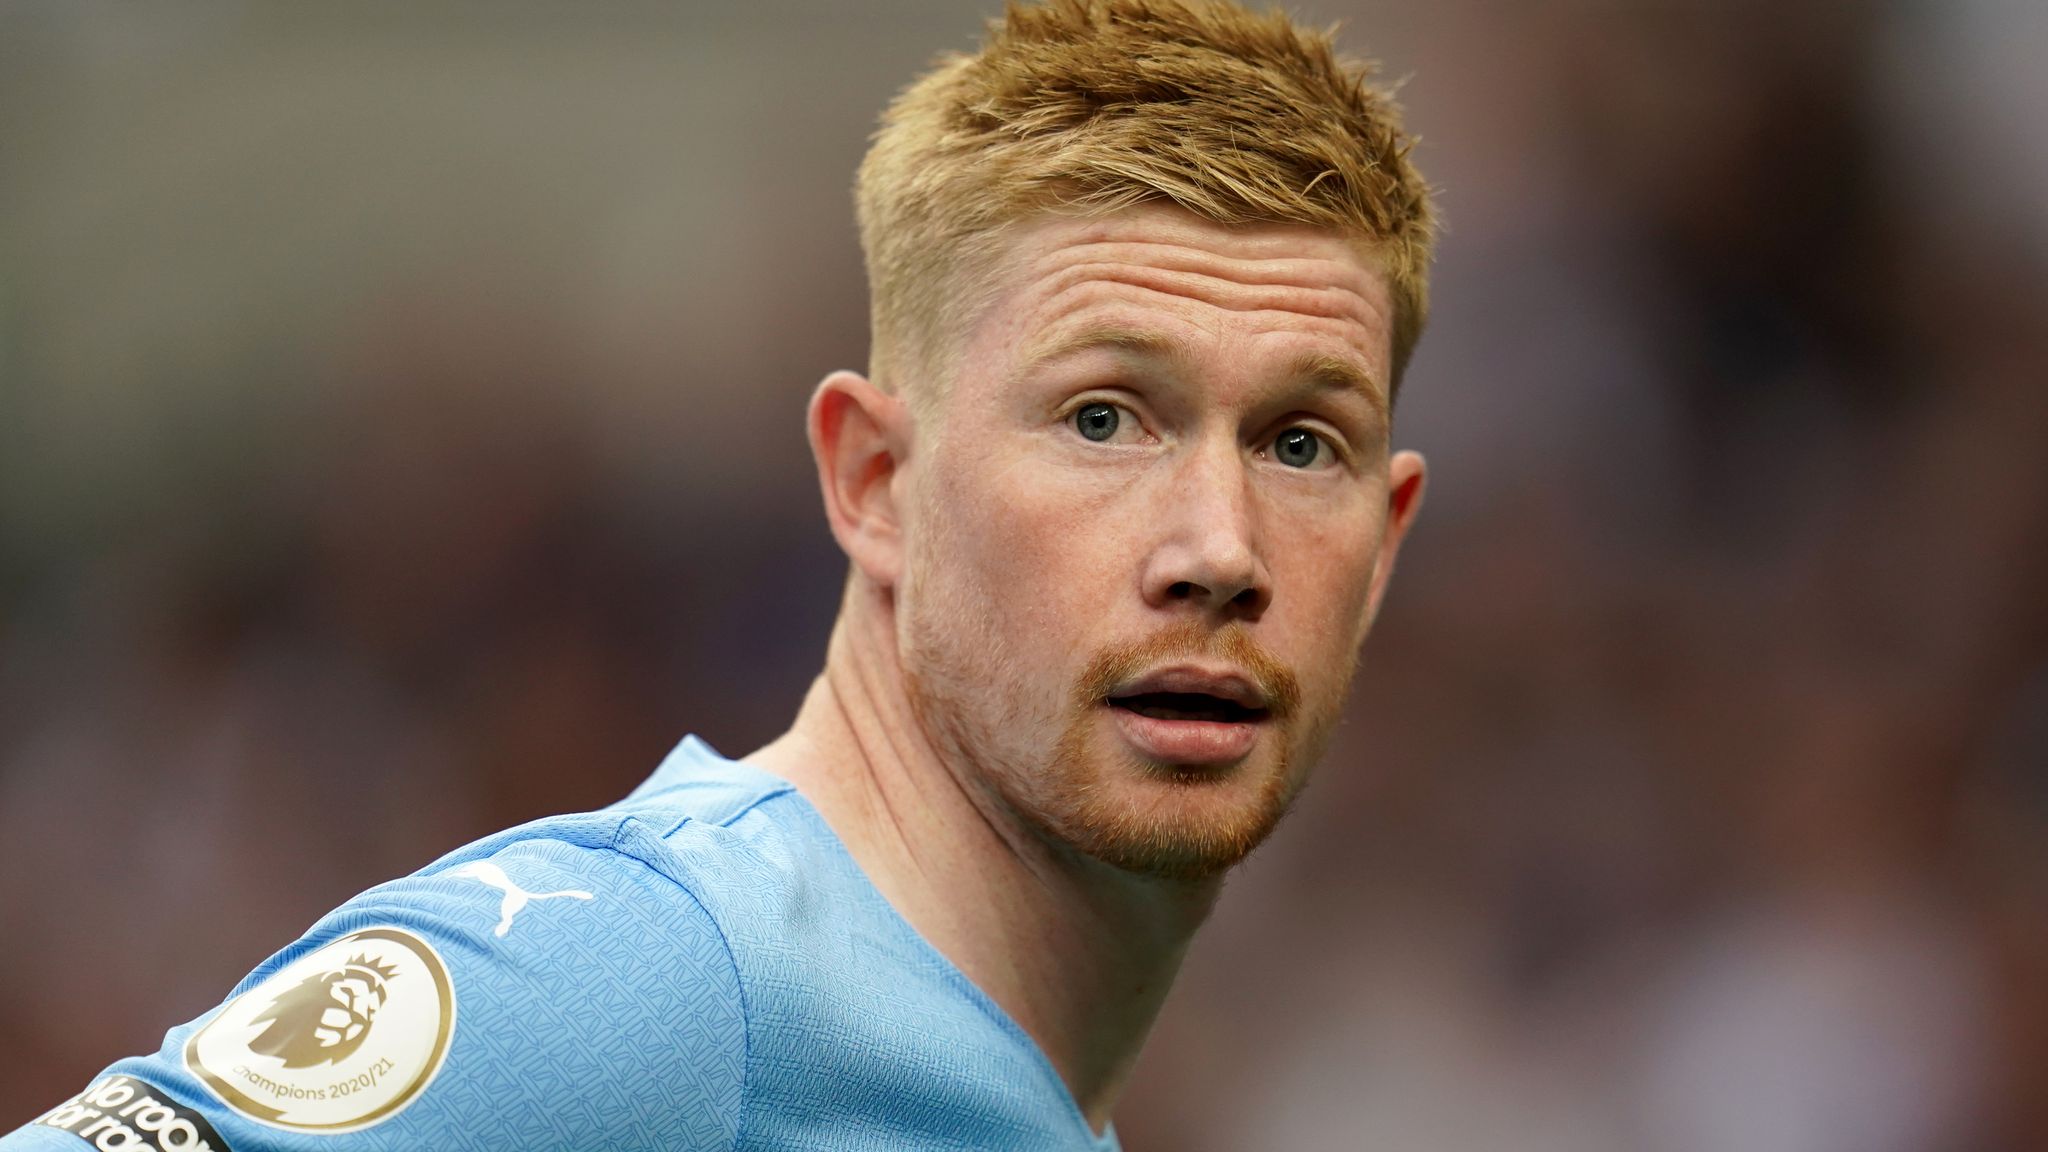 Kevin De Bruyne Net Worth, Age, Height, Parents, More